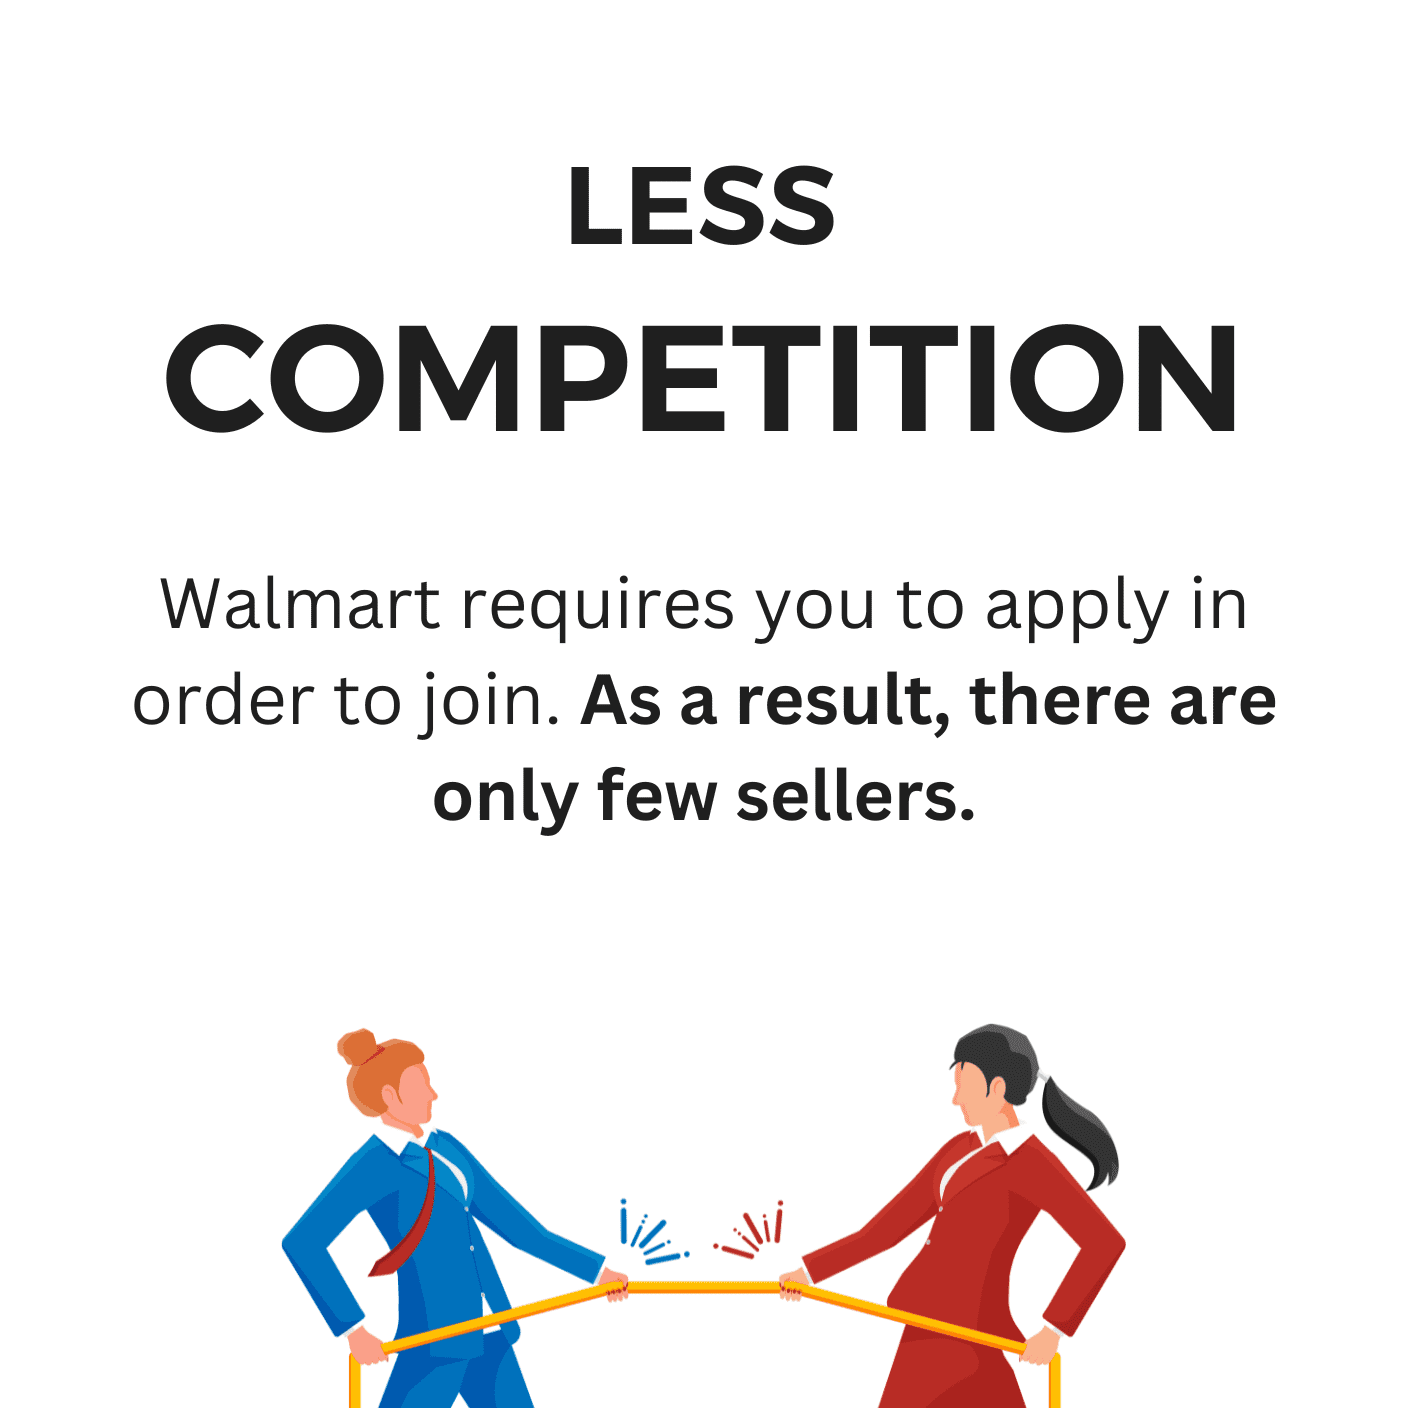 Less Competition